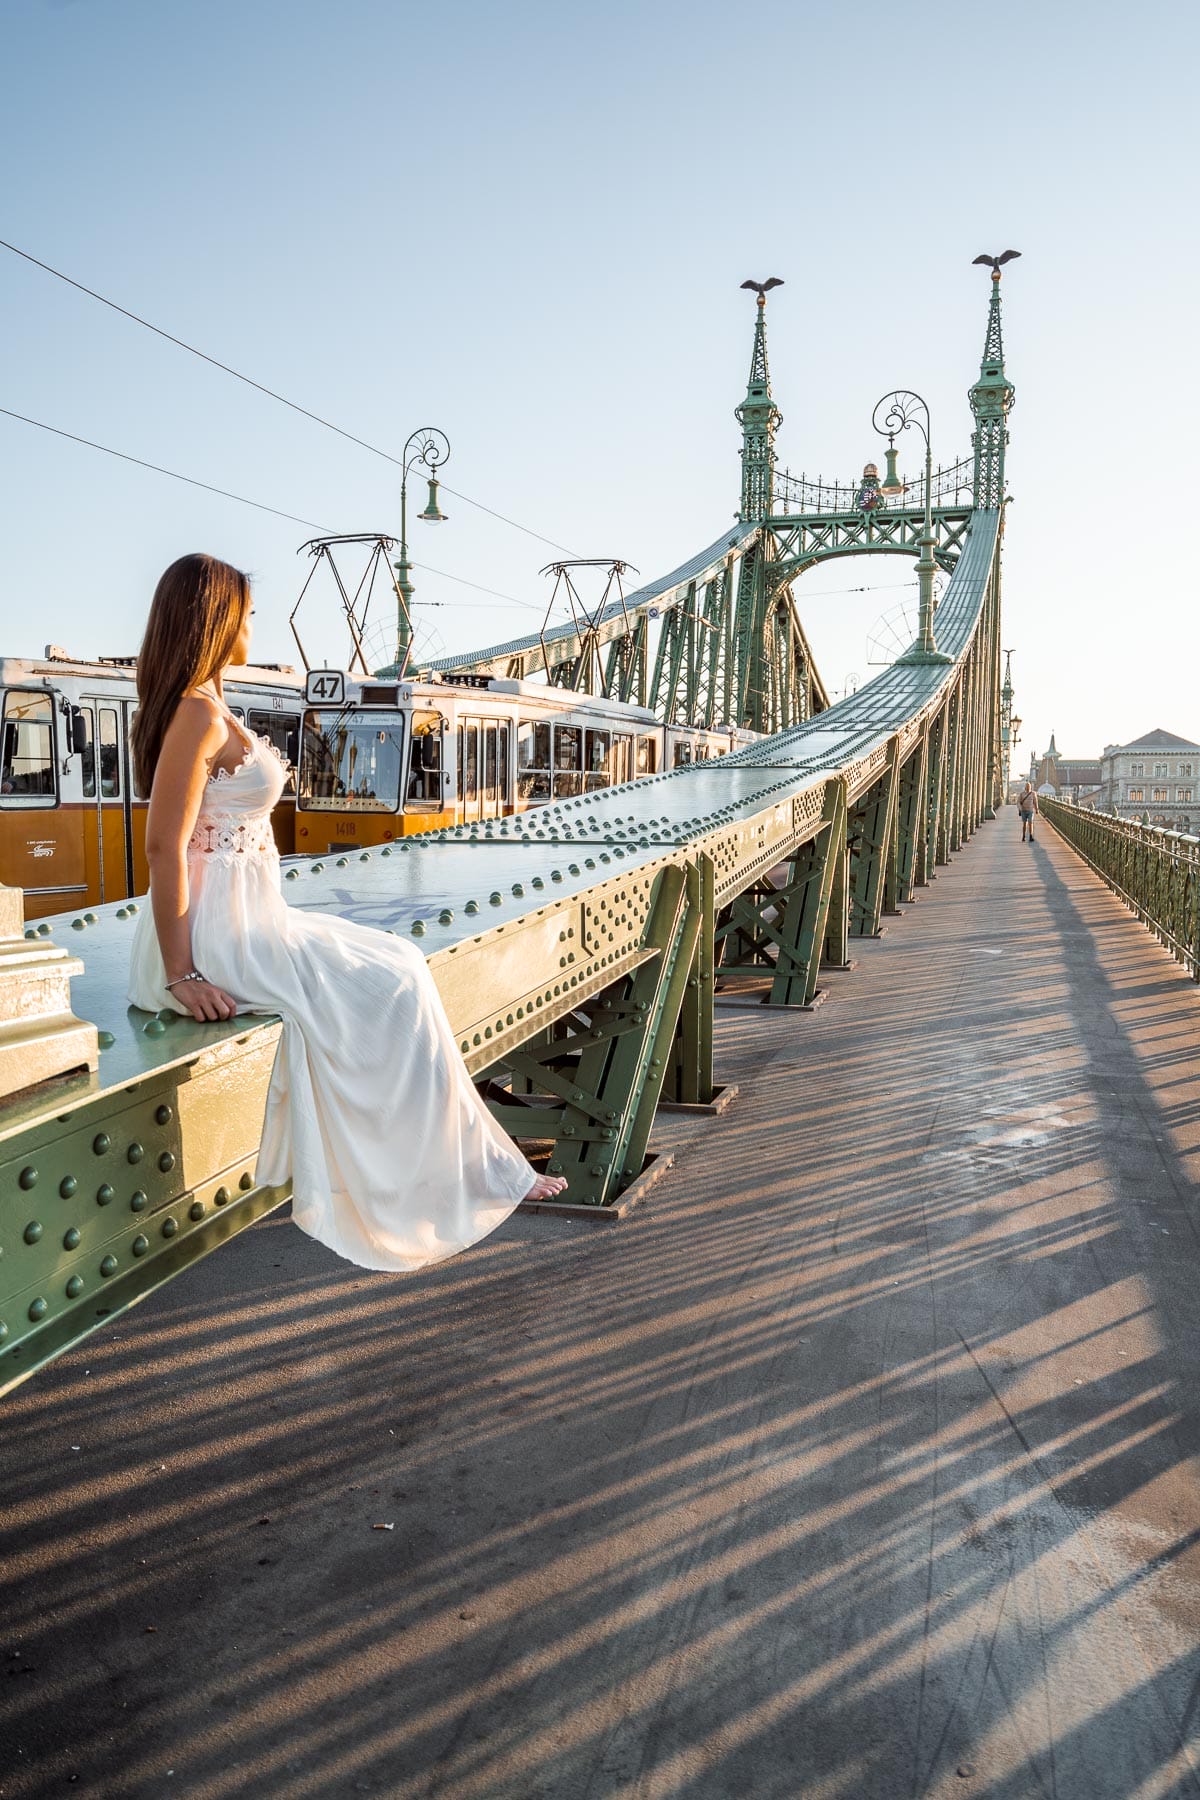 Girl in a white dress sitting on the Liberty Bridge in Budapest